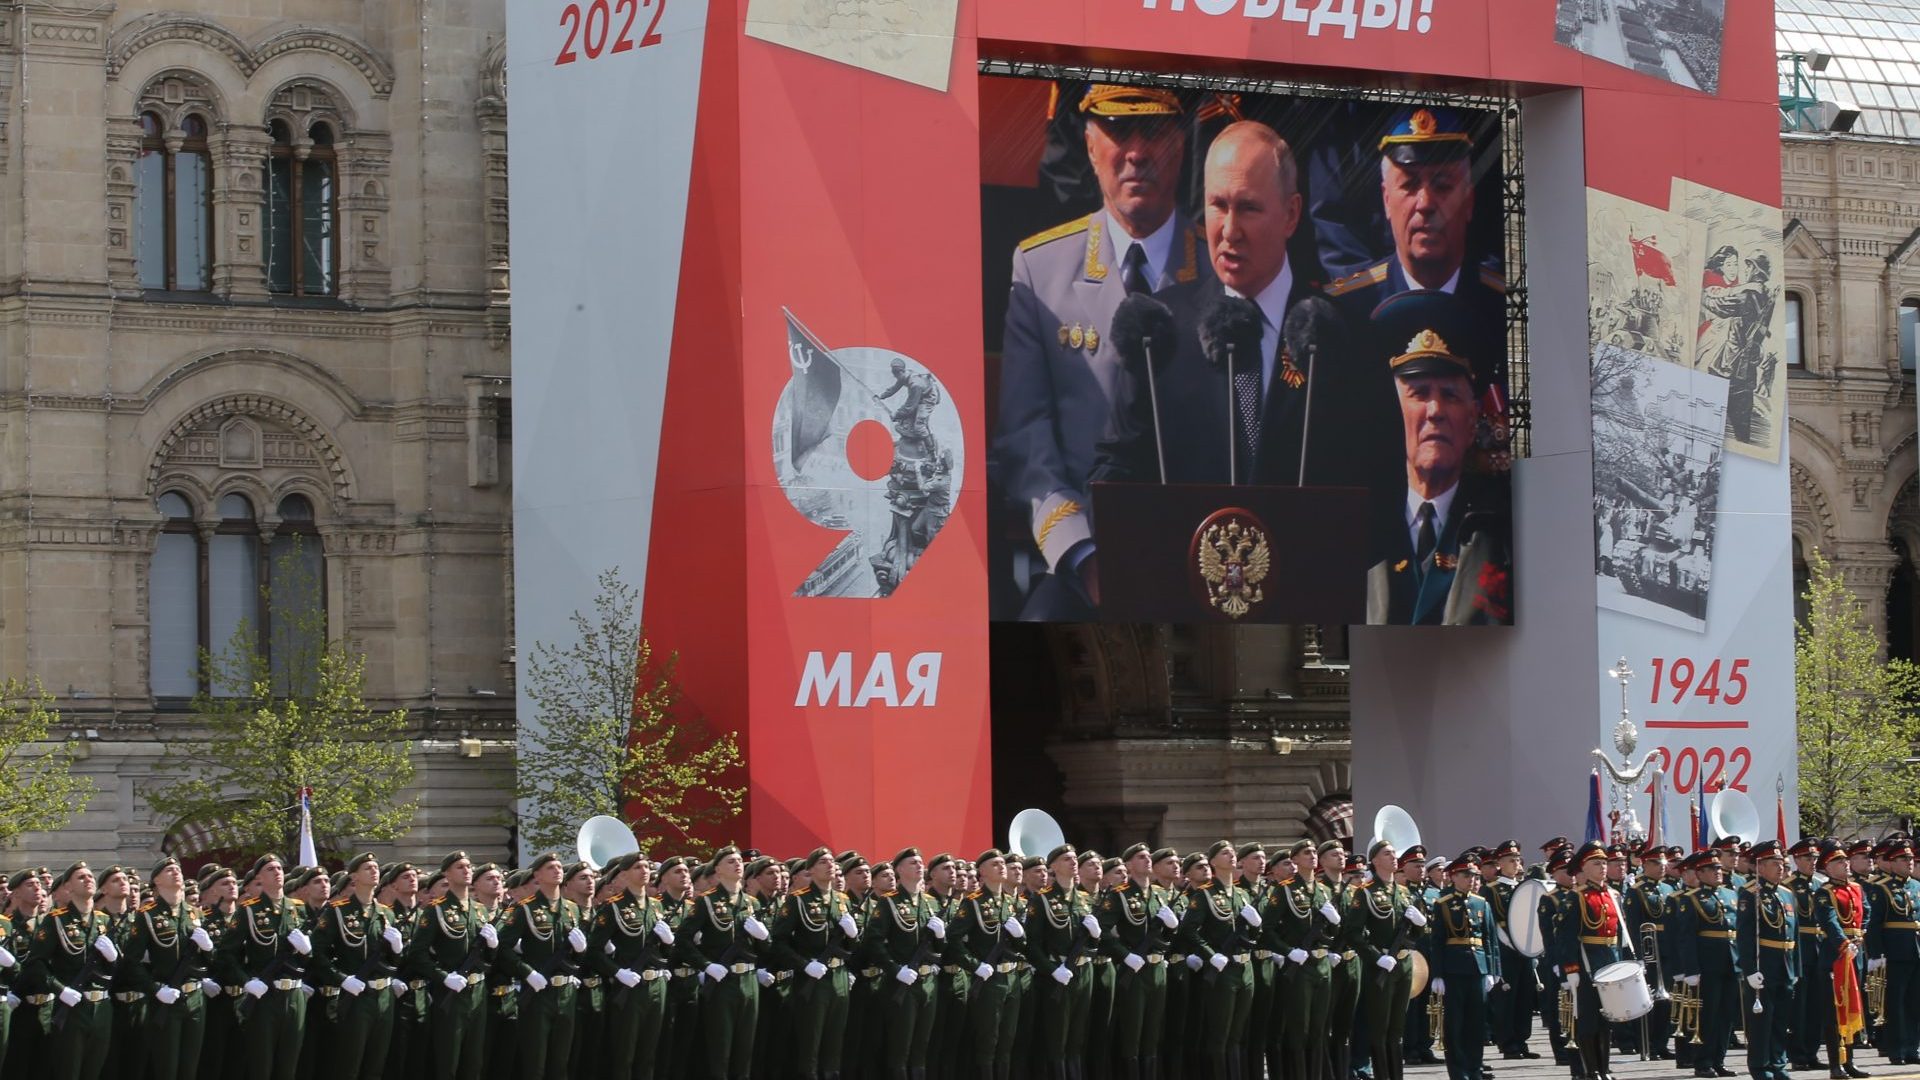  Russian President Vladimir Putin seen on the screen speacking during the Victory Day Parade at Red Square on May 9, 2022 in Moscow (Photo by Contributor/Getty Images)